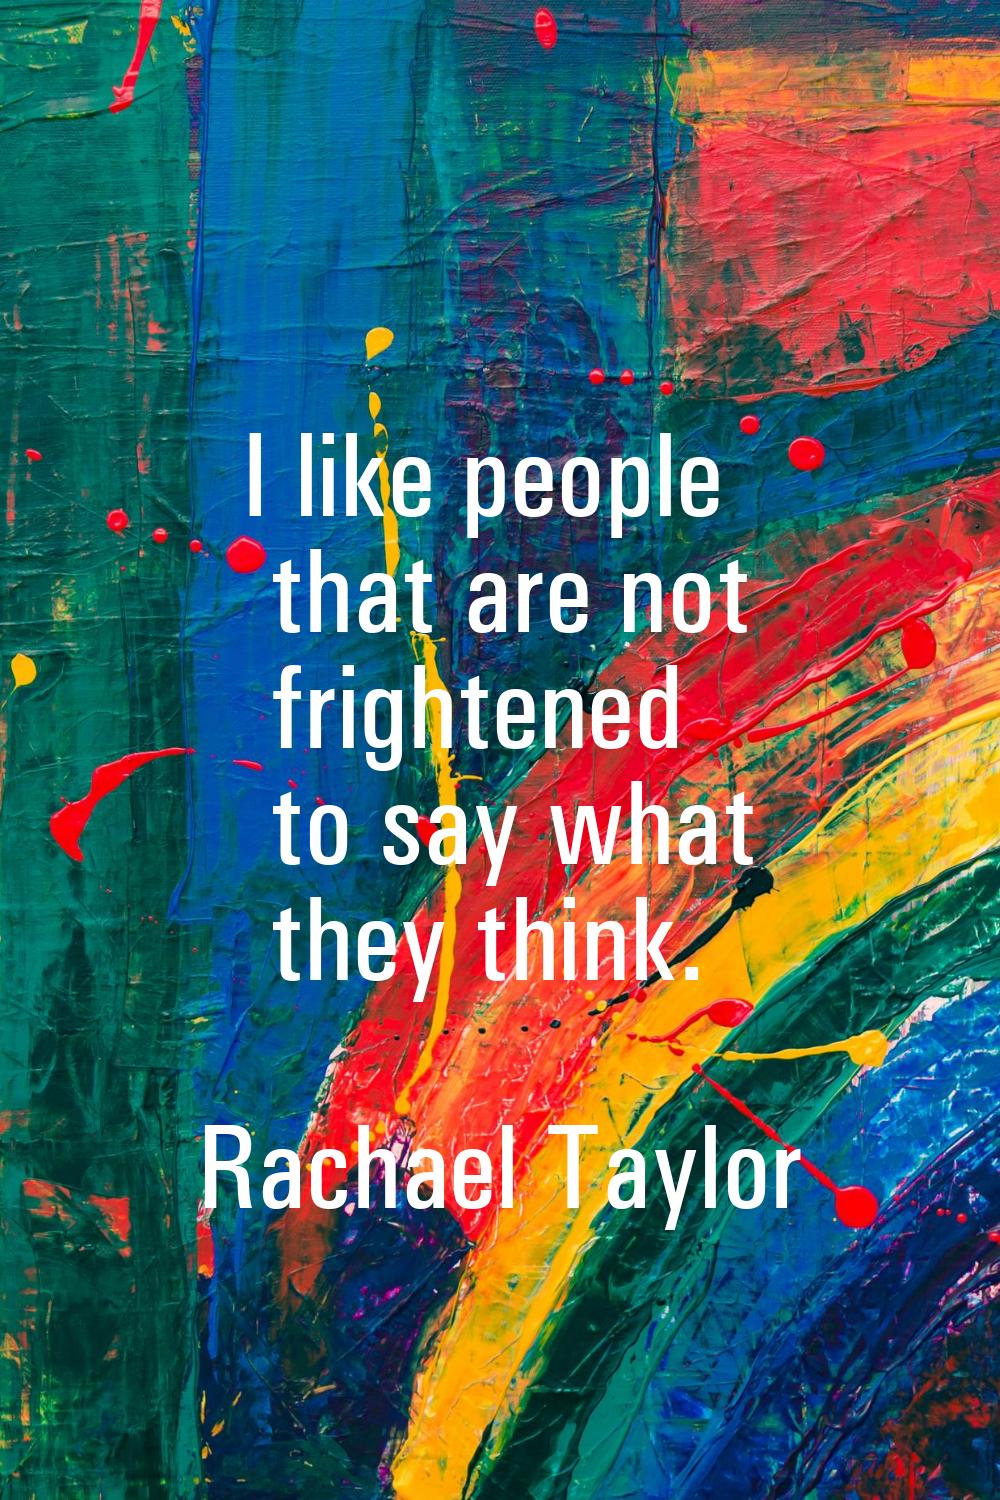 I like people that are not frightened to say what they think.